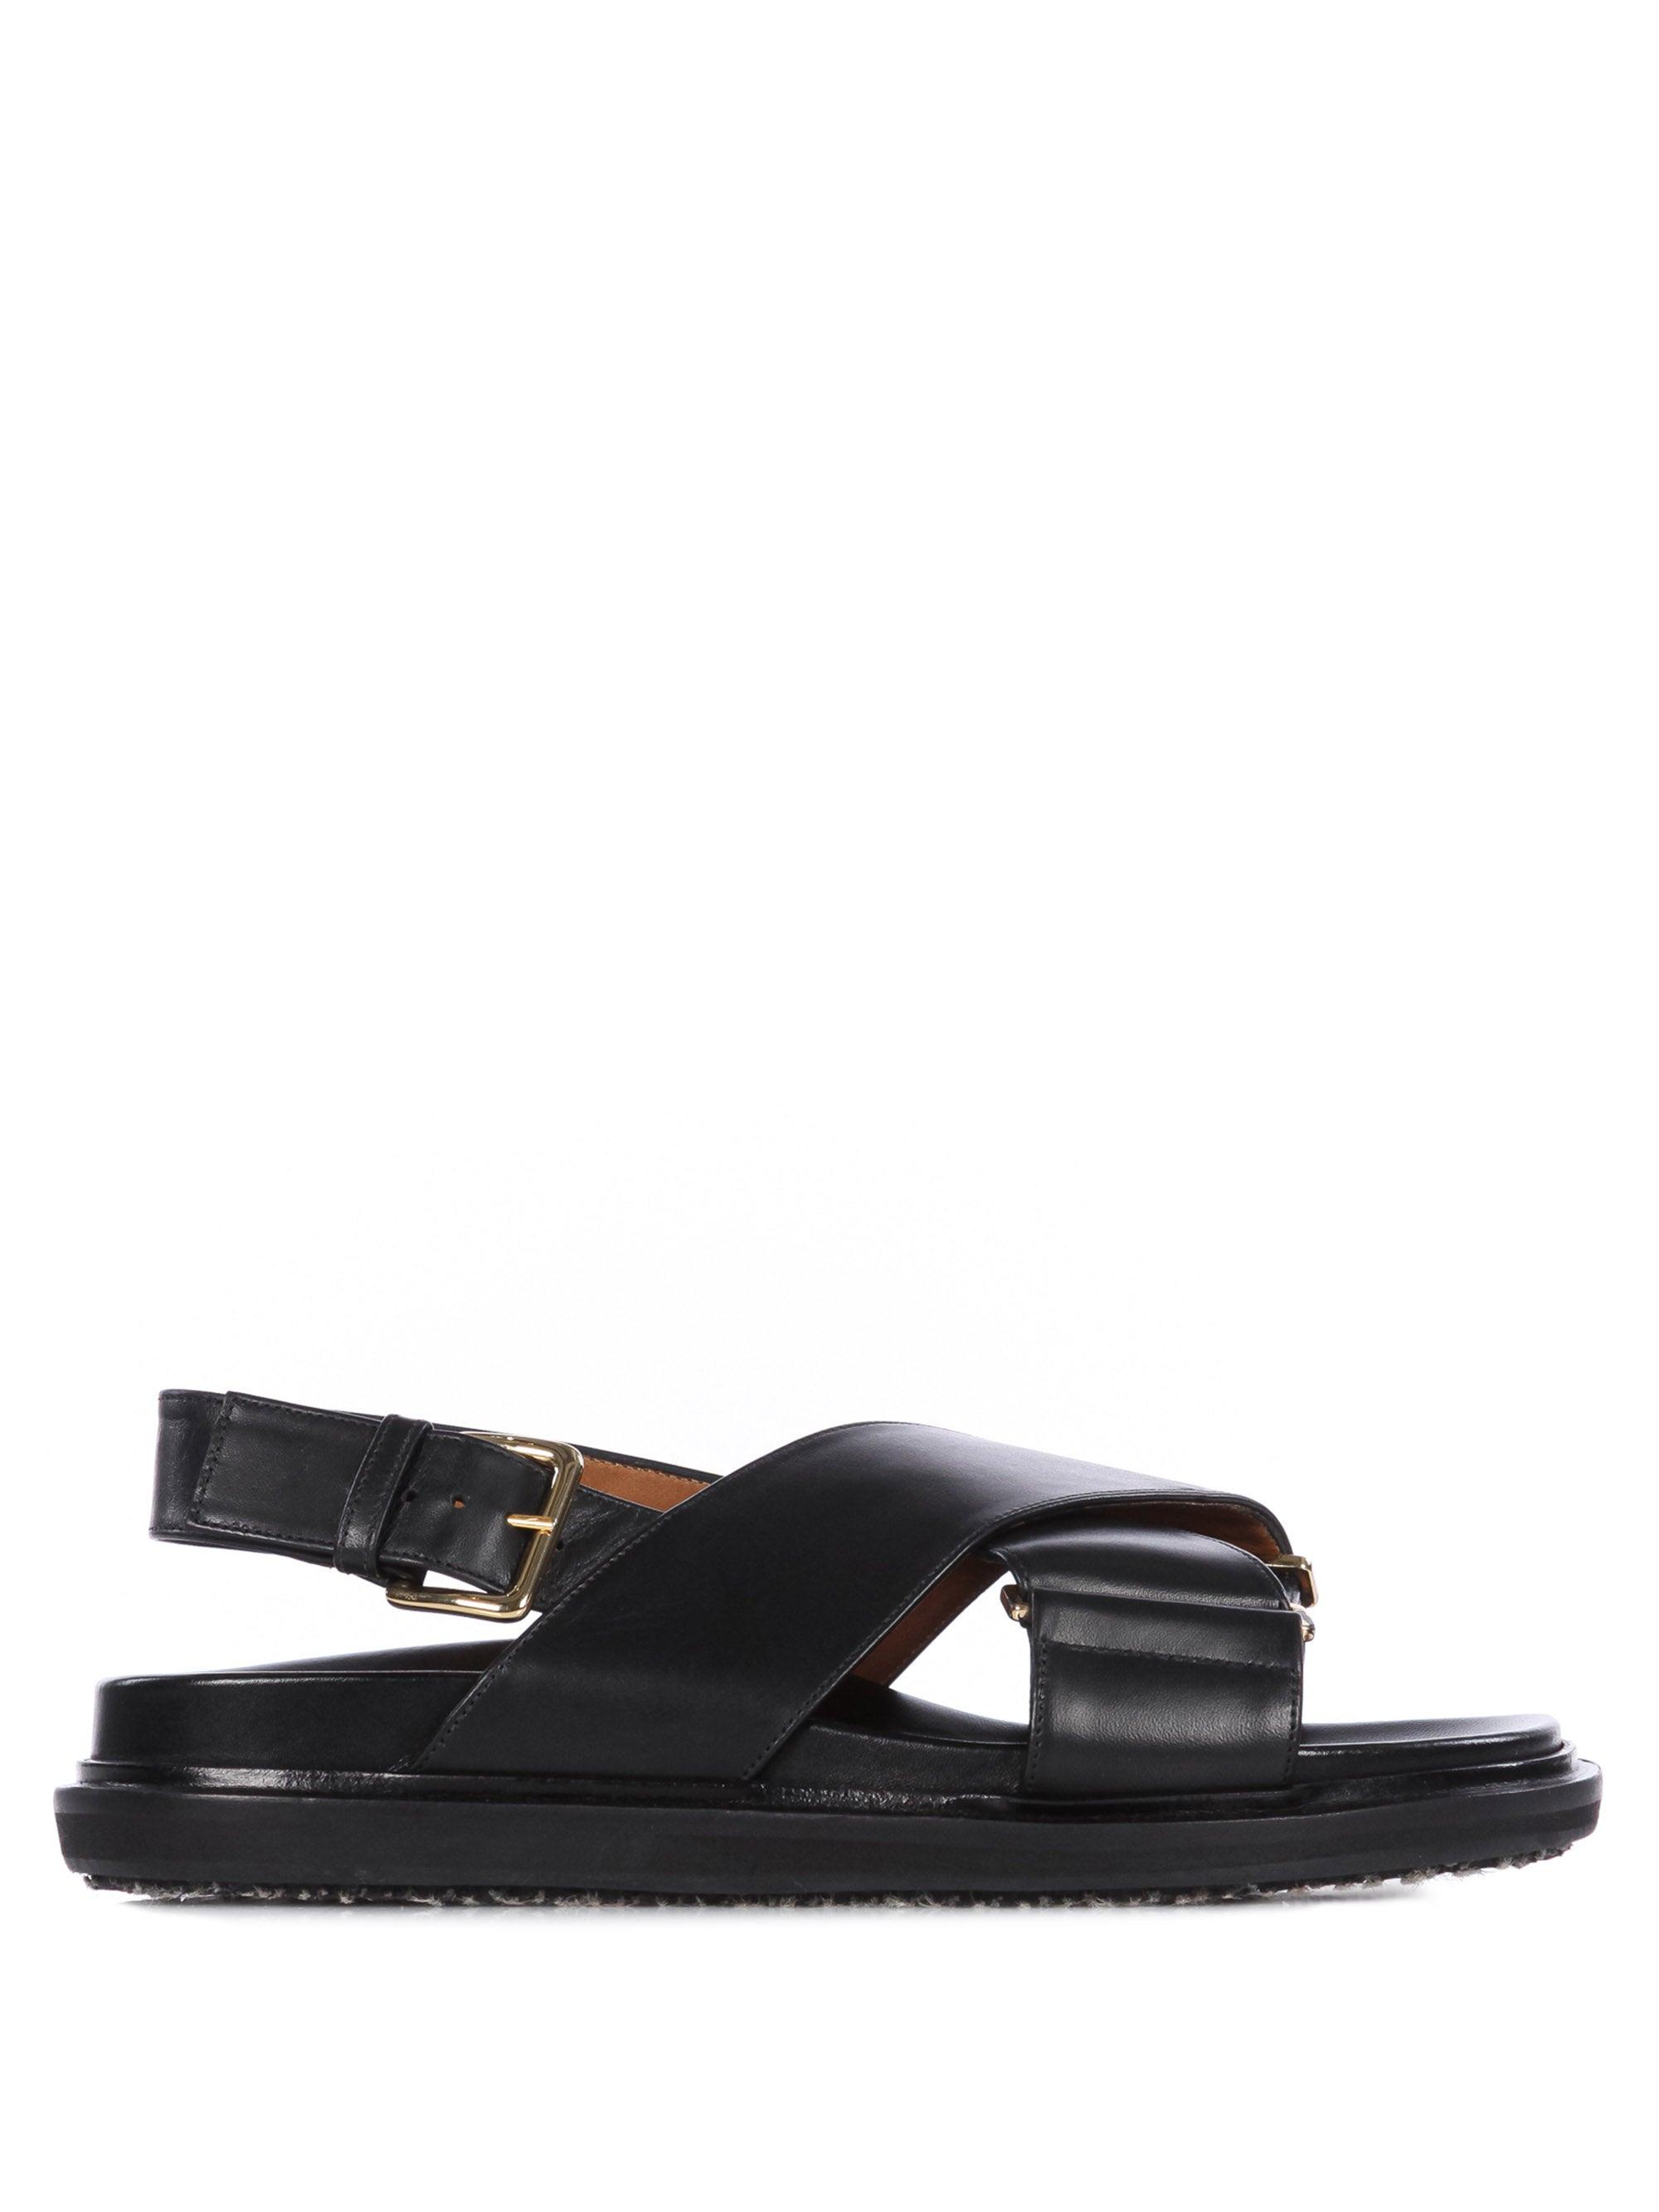 Marni Fussbett Smooth Leather Sandals in Black - Save 68% - Lyst